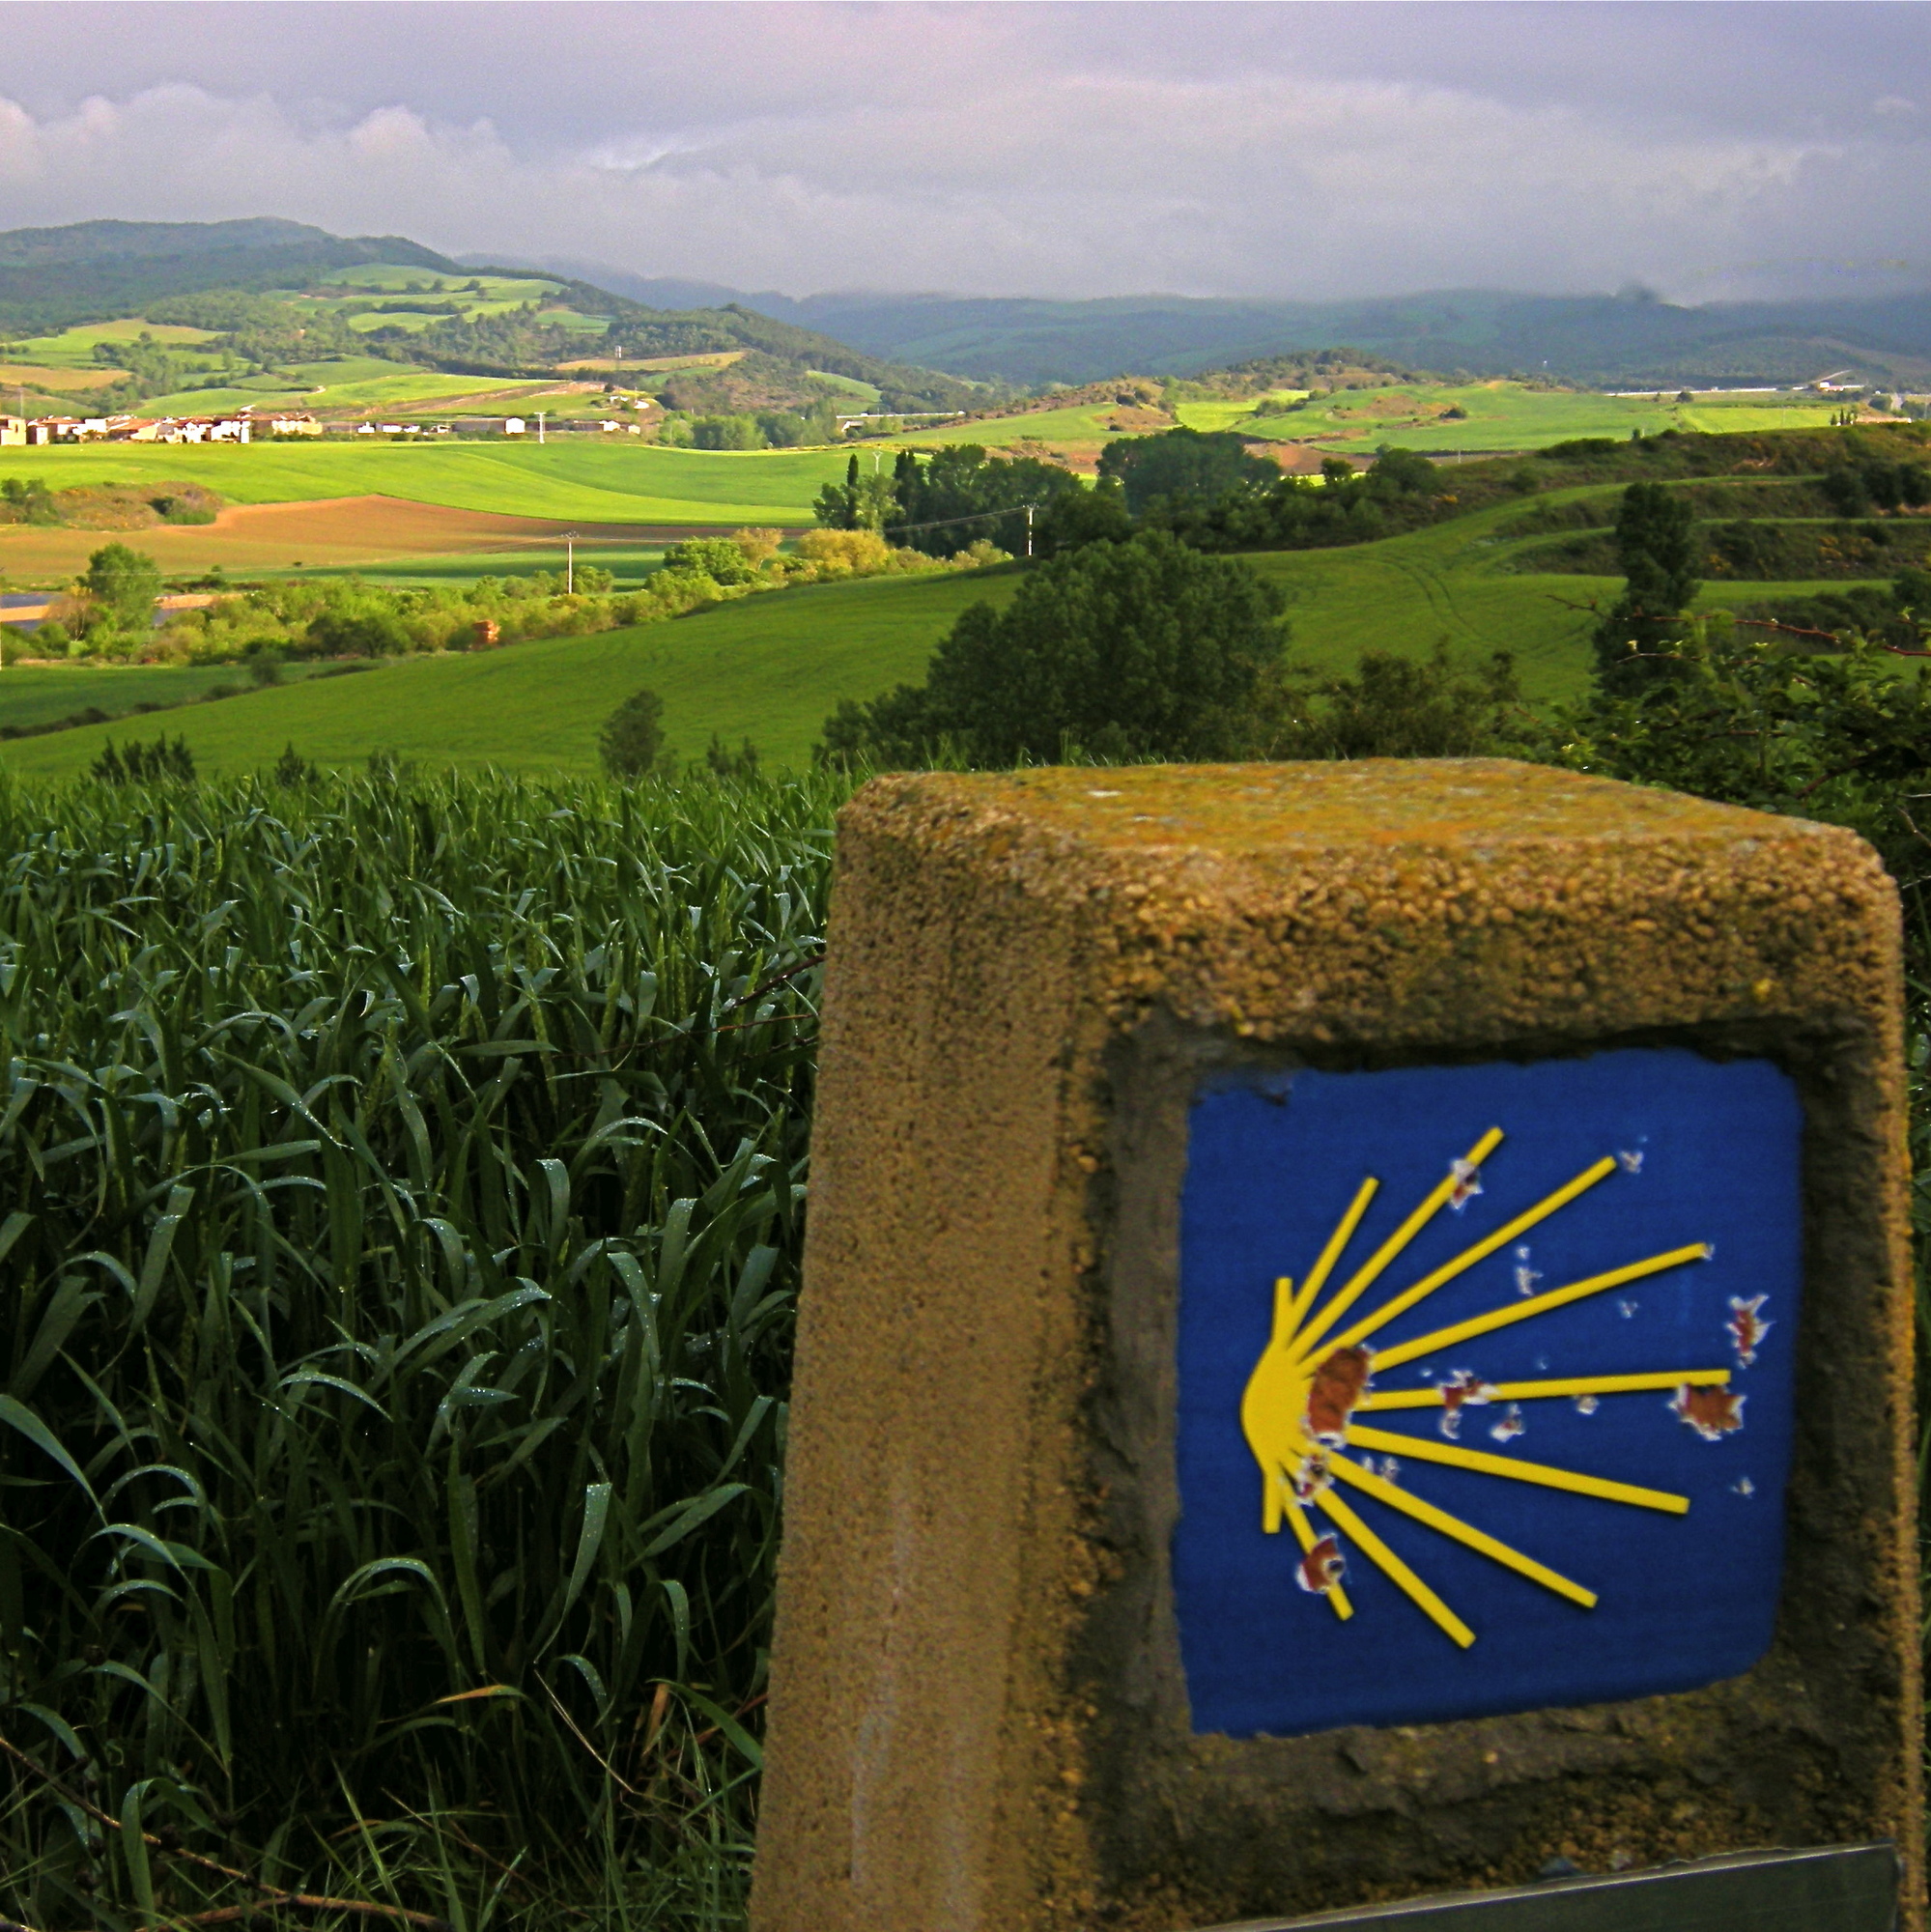 Movie Motivate You to Walk 500 Miles? Film Review: Walking the Camino